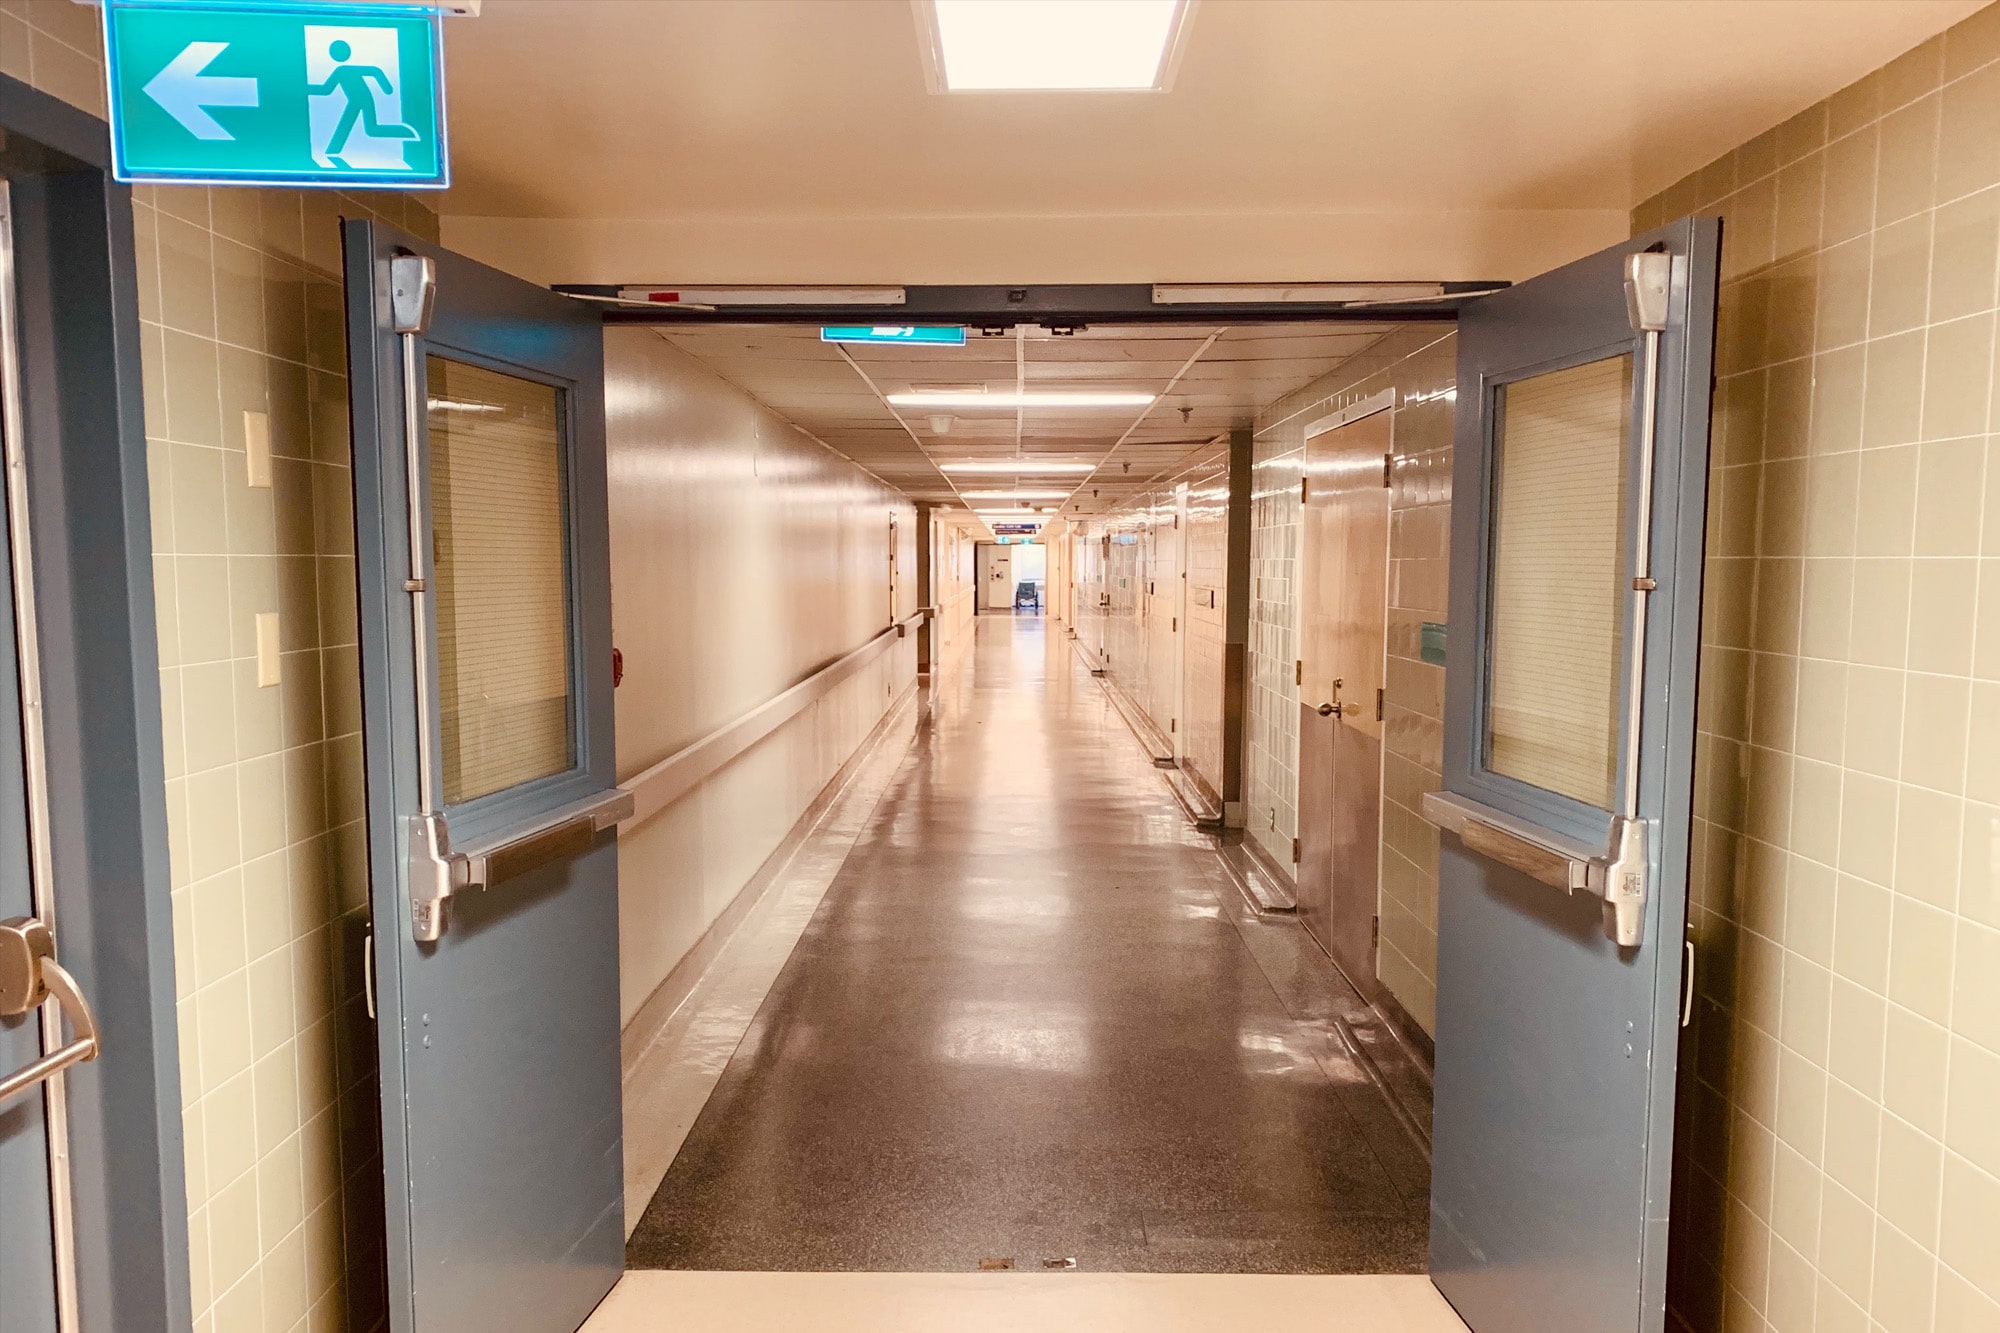 Long, empty hospital corridor with an exit sign pointing to a door on the left